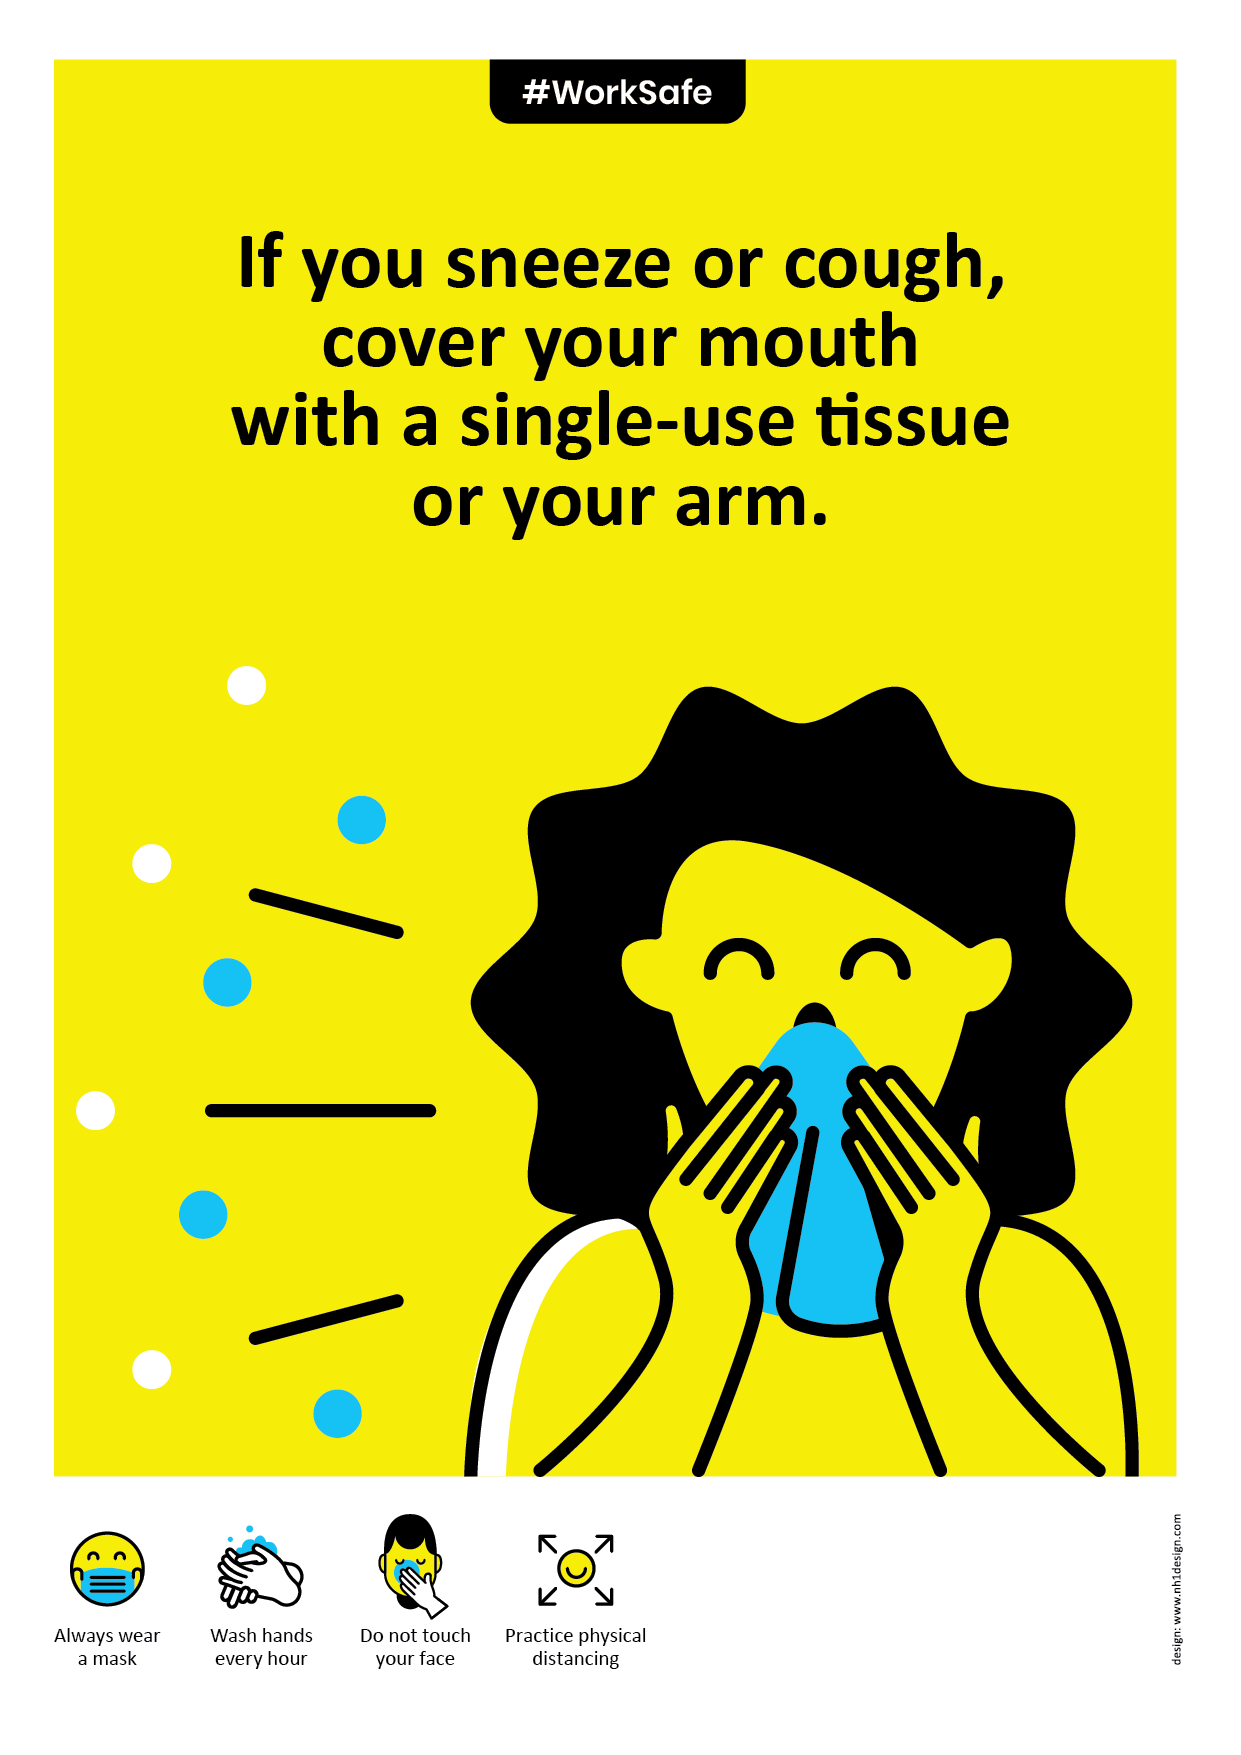 Cover your Mouth